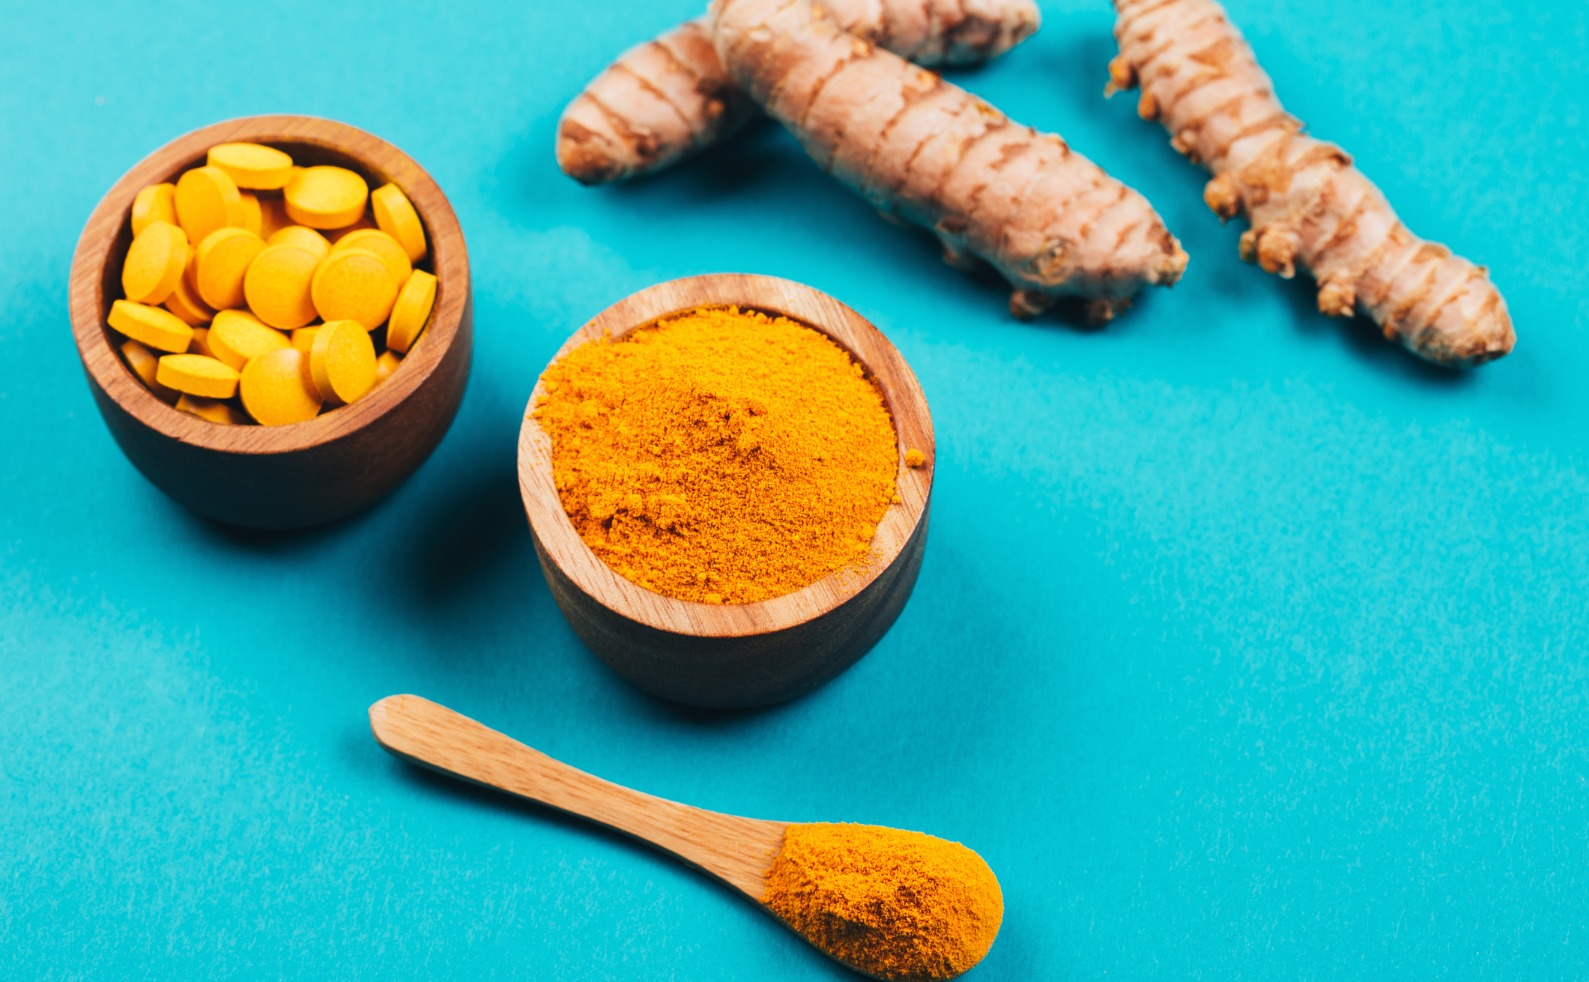 Benefits of Turmeric for health